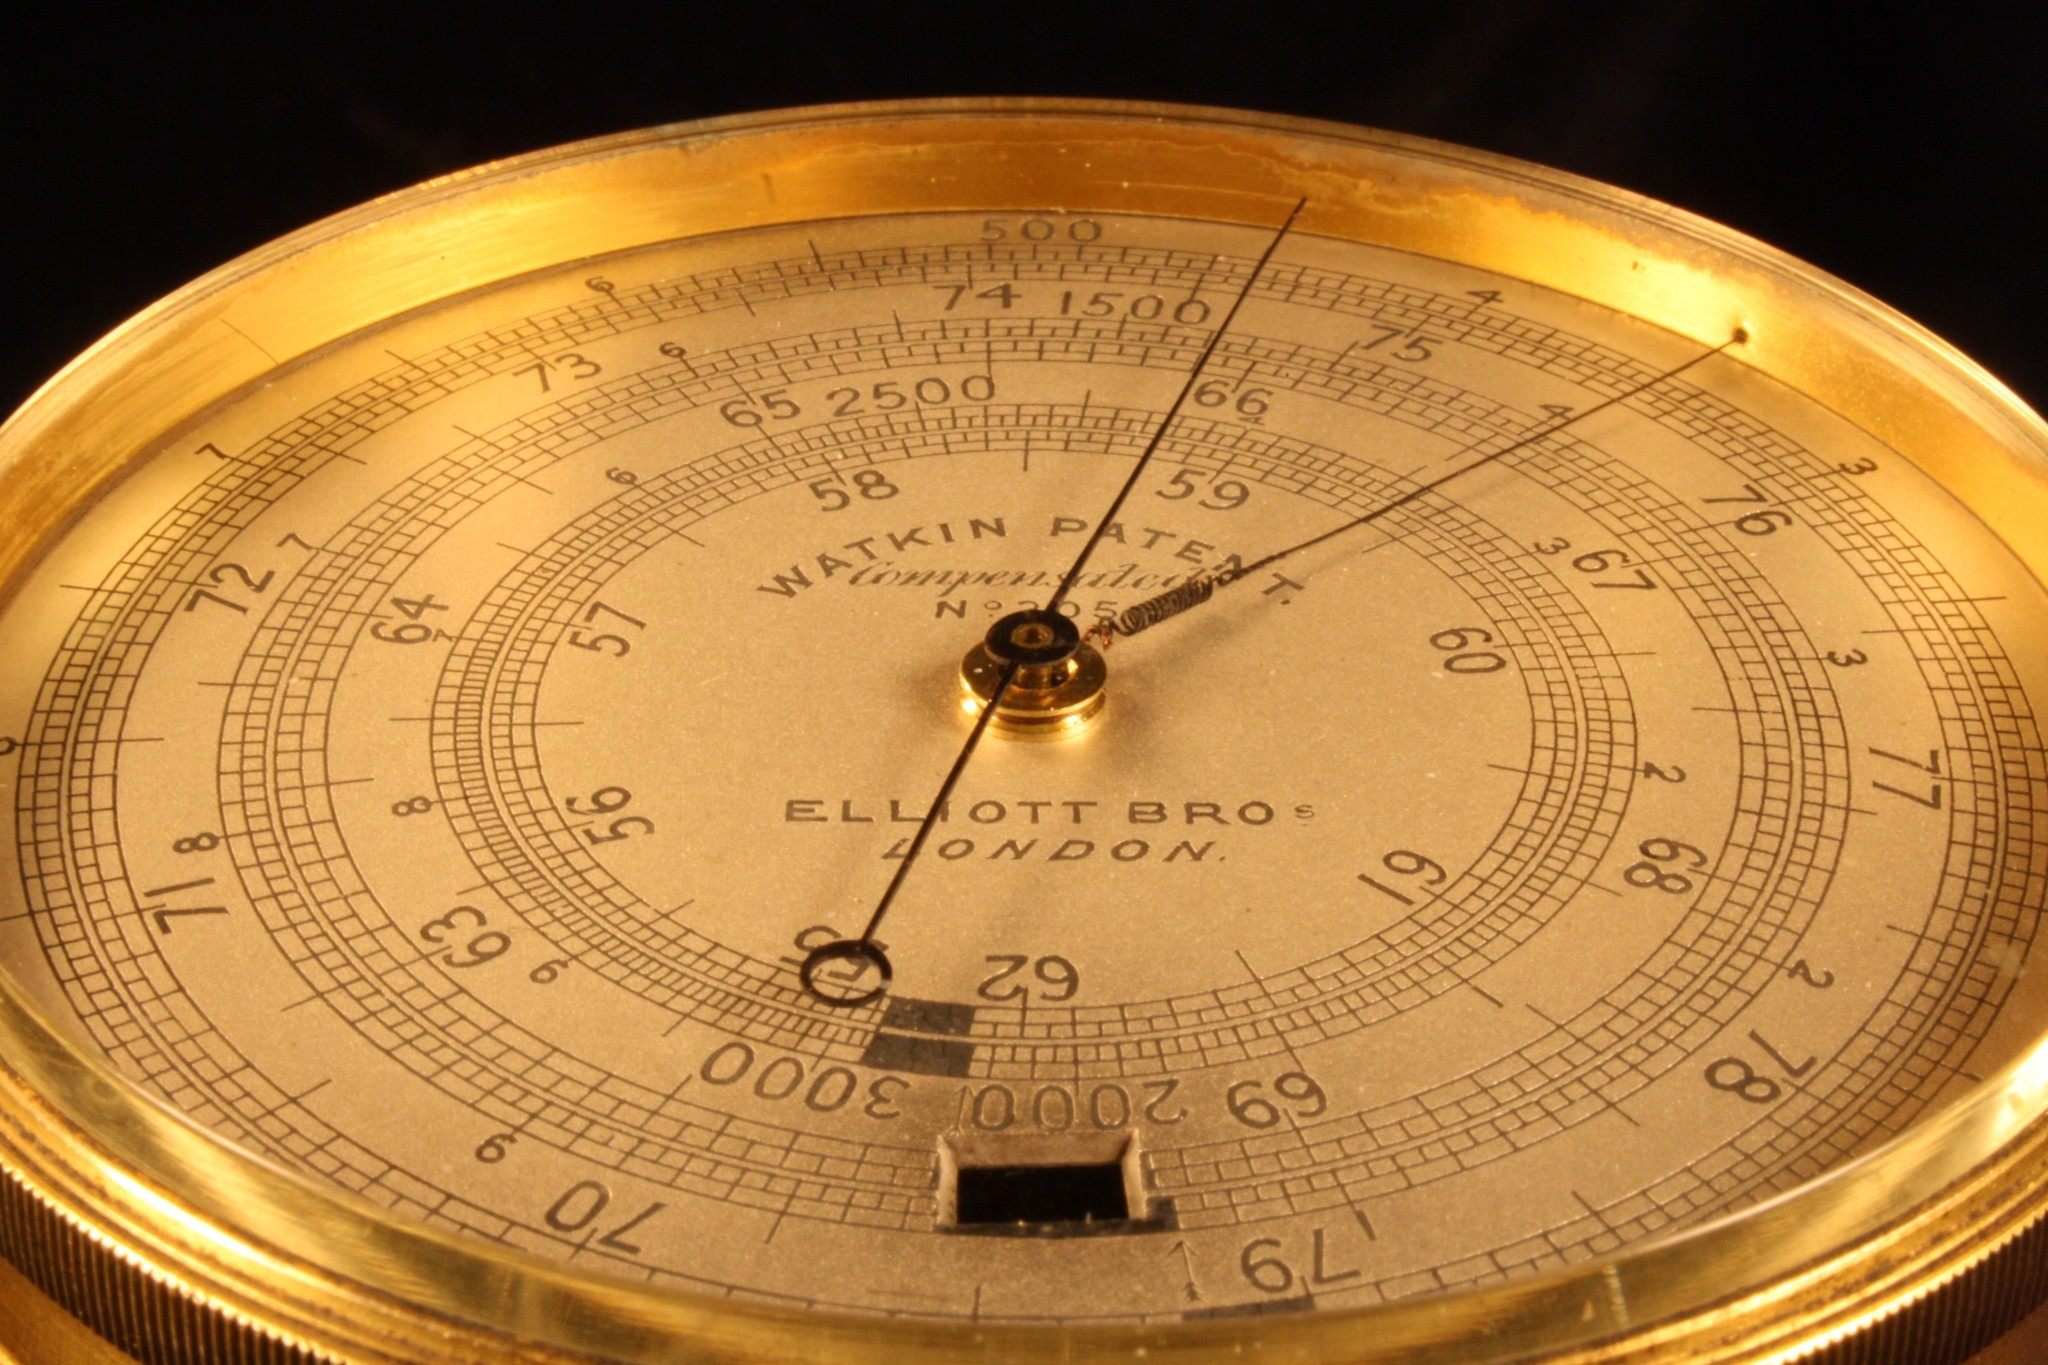 WATKIN PATENT EXTENDED SCALE BAROMETER ALTIMETER BY HICKS No 305 c1888